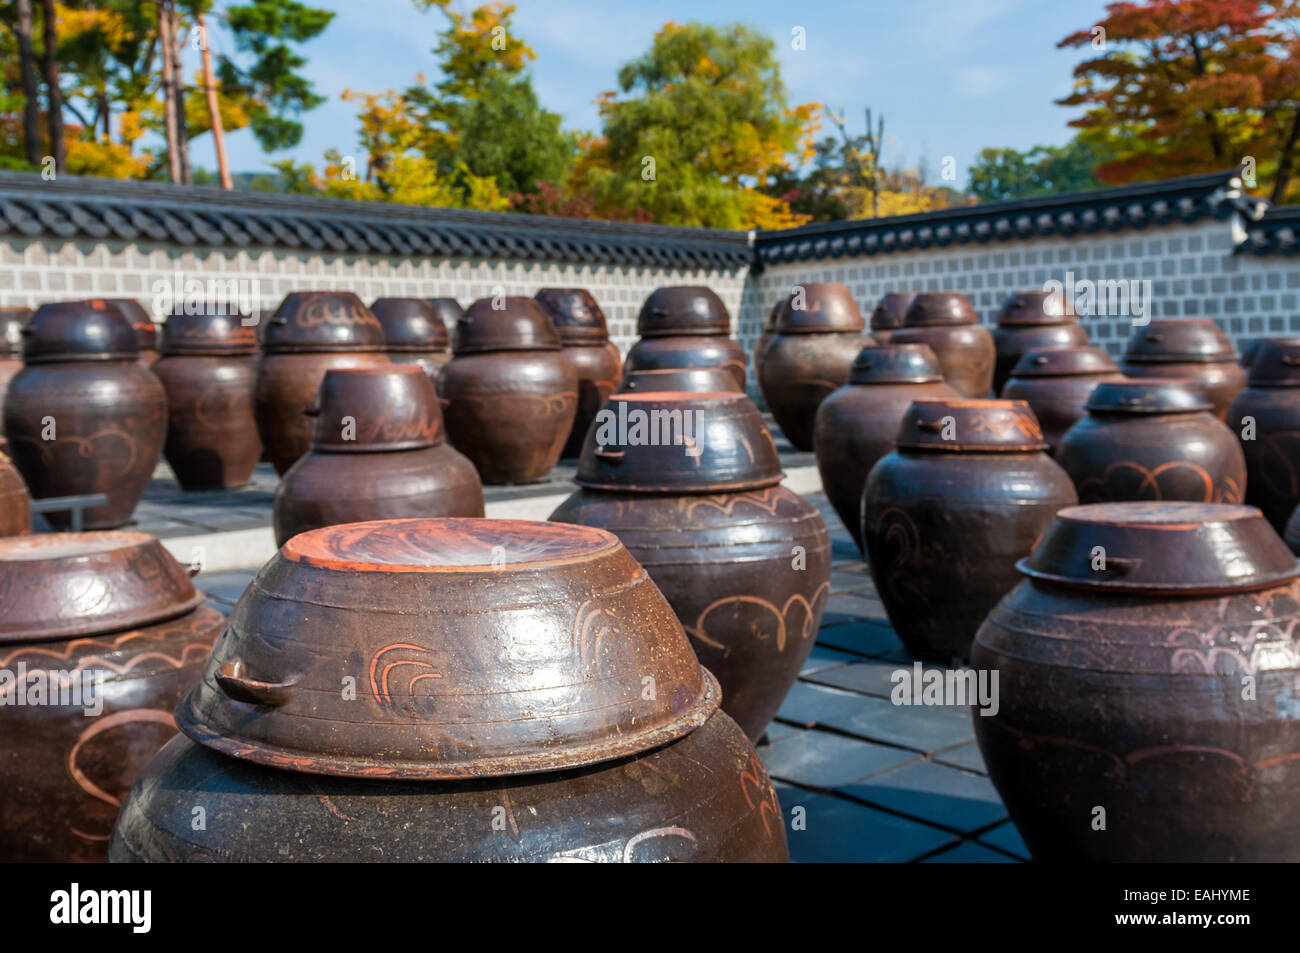 https://c8.alamy.com/comp/EAHYME/dozens-of-large-clay-pots-hold-fermenting-kimchi-in-seoul-south-korea-EAHYME.jpg